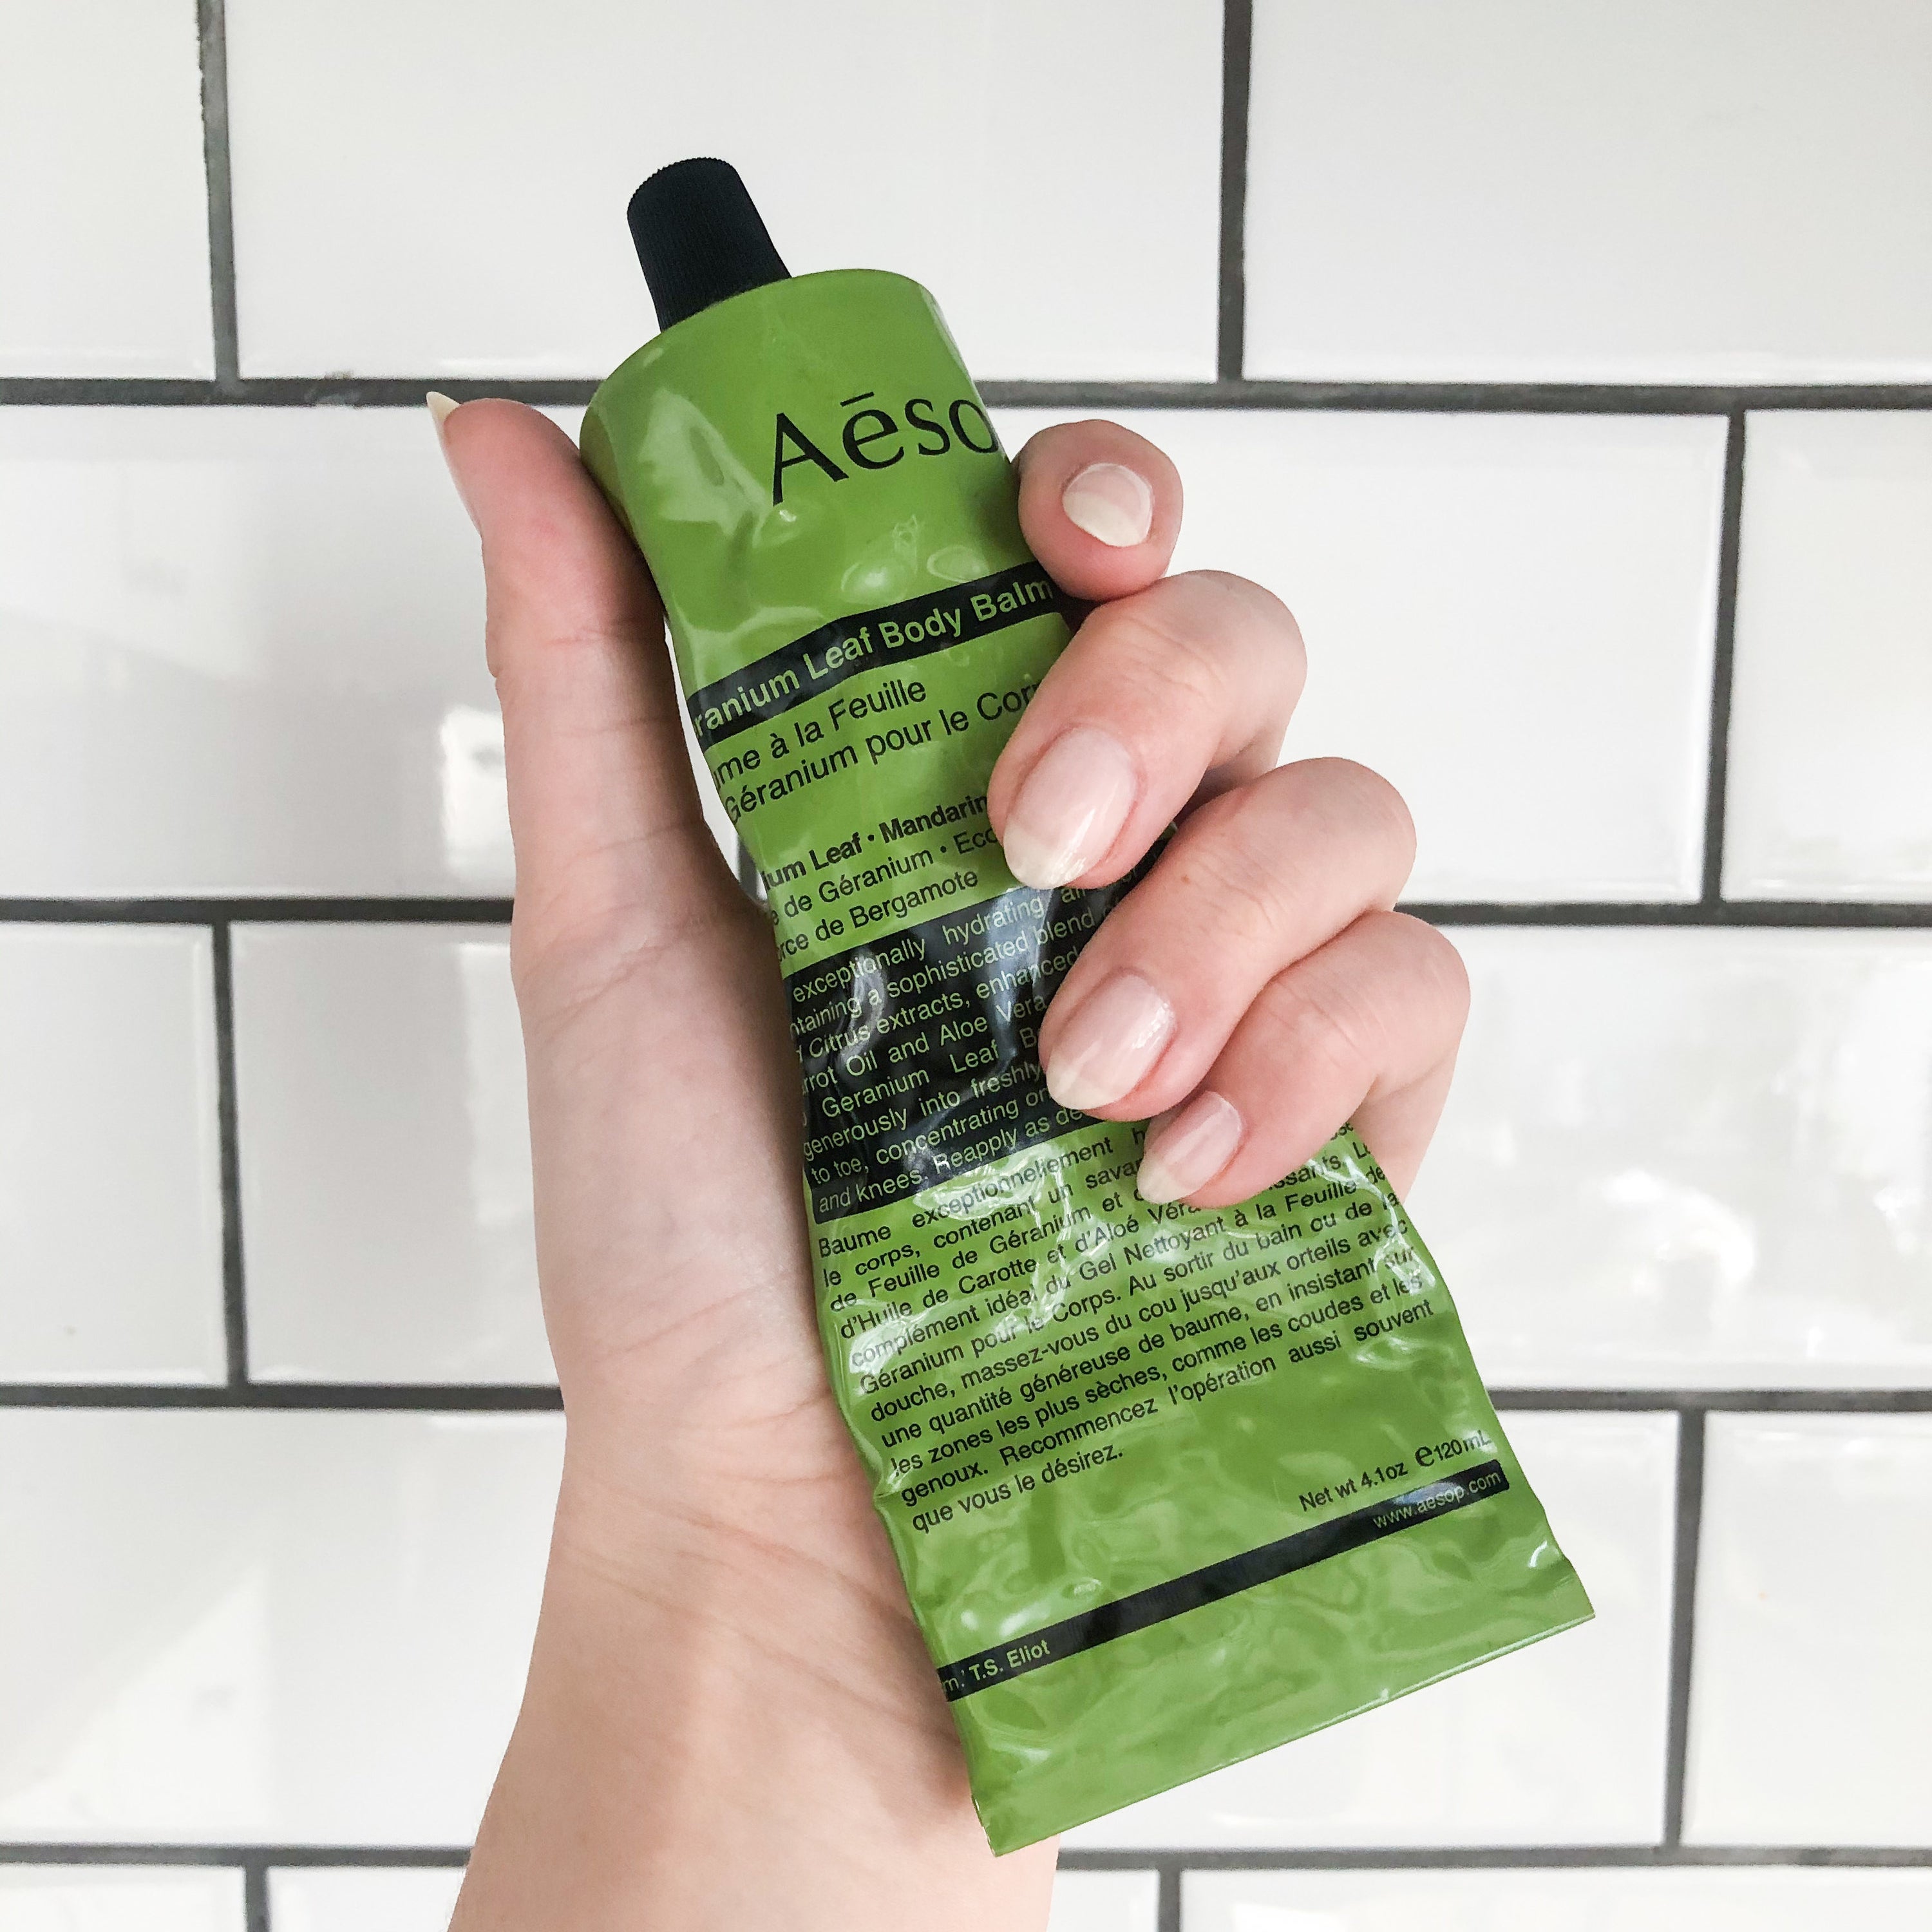 A hand holds a tube of the body balm